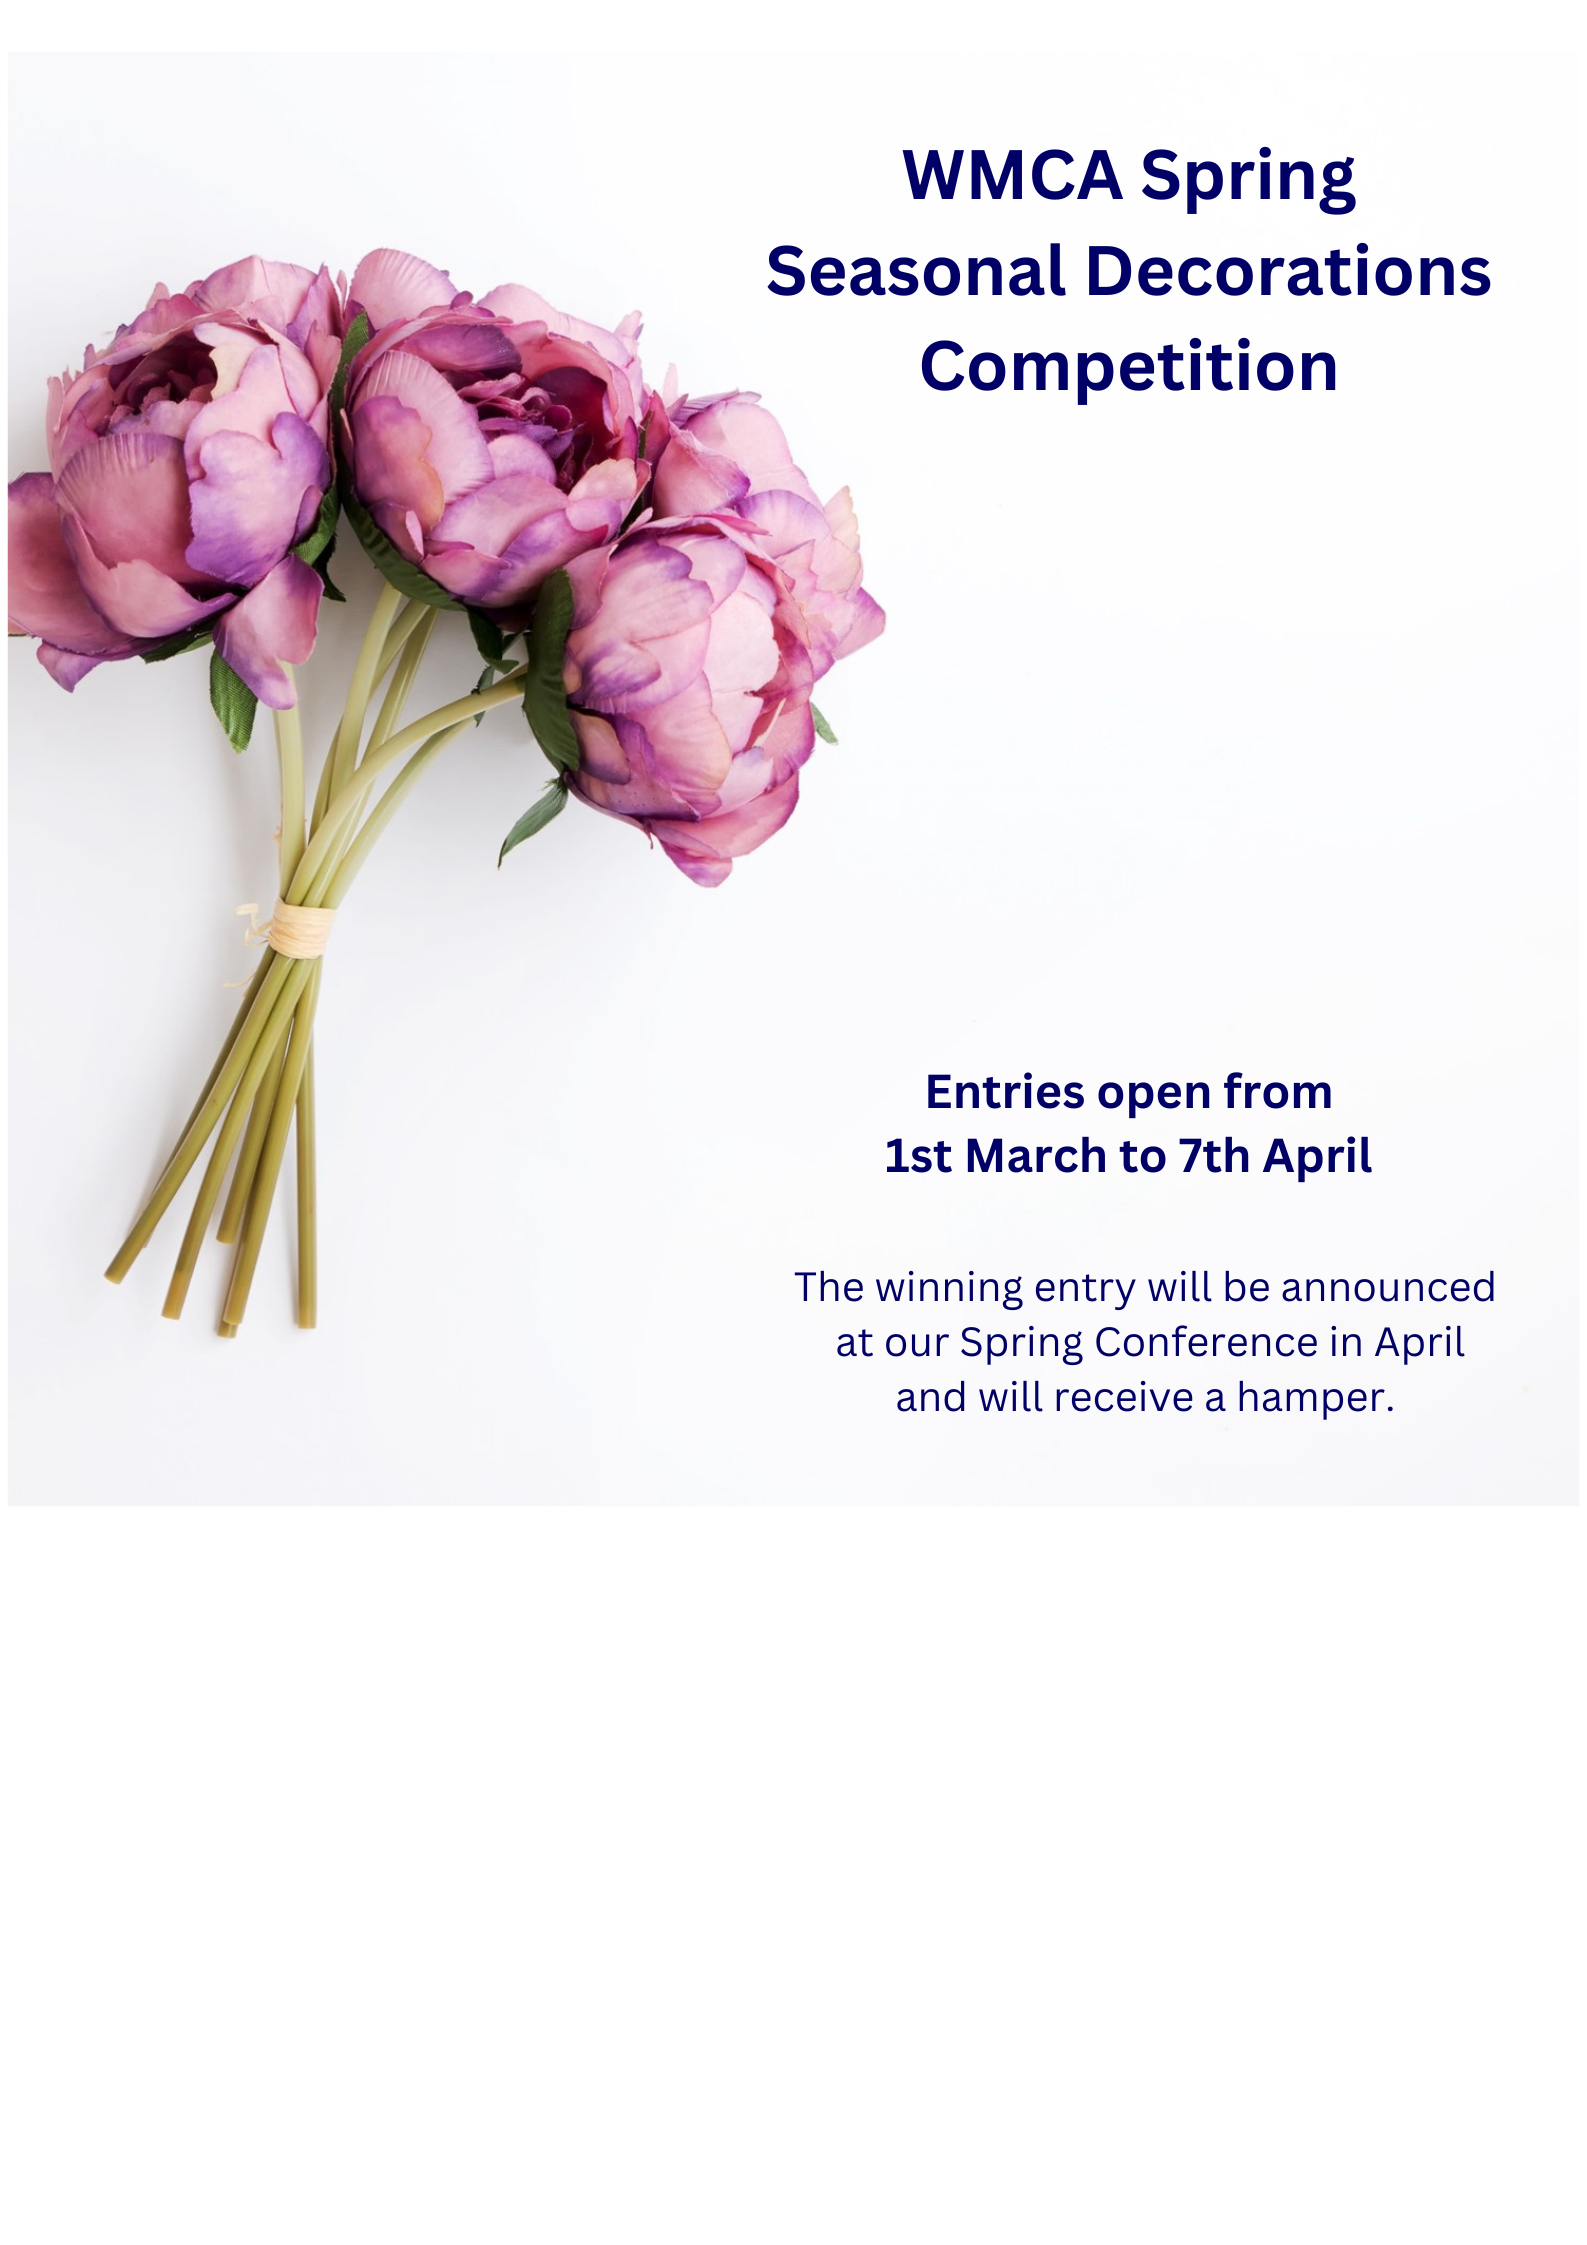 https://stratus.campaign-image.eu/images/32883000015358004_zc_v1_1709741483198_spring_decorations_competition_(2).png